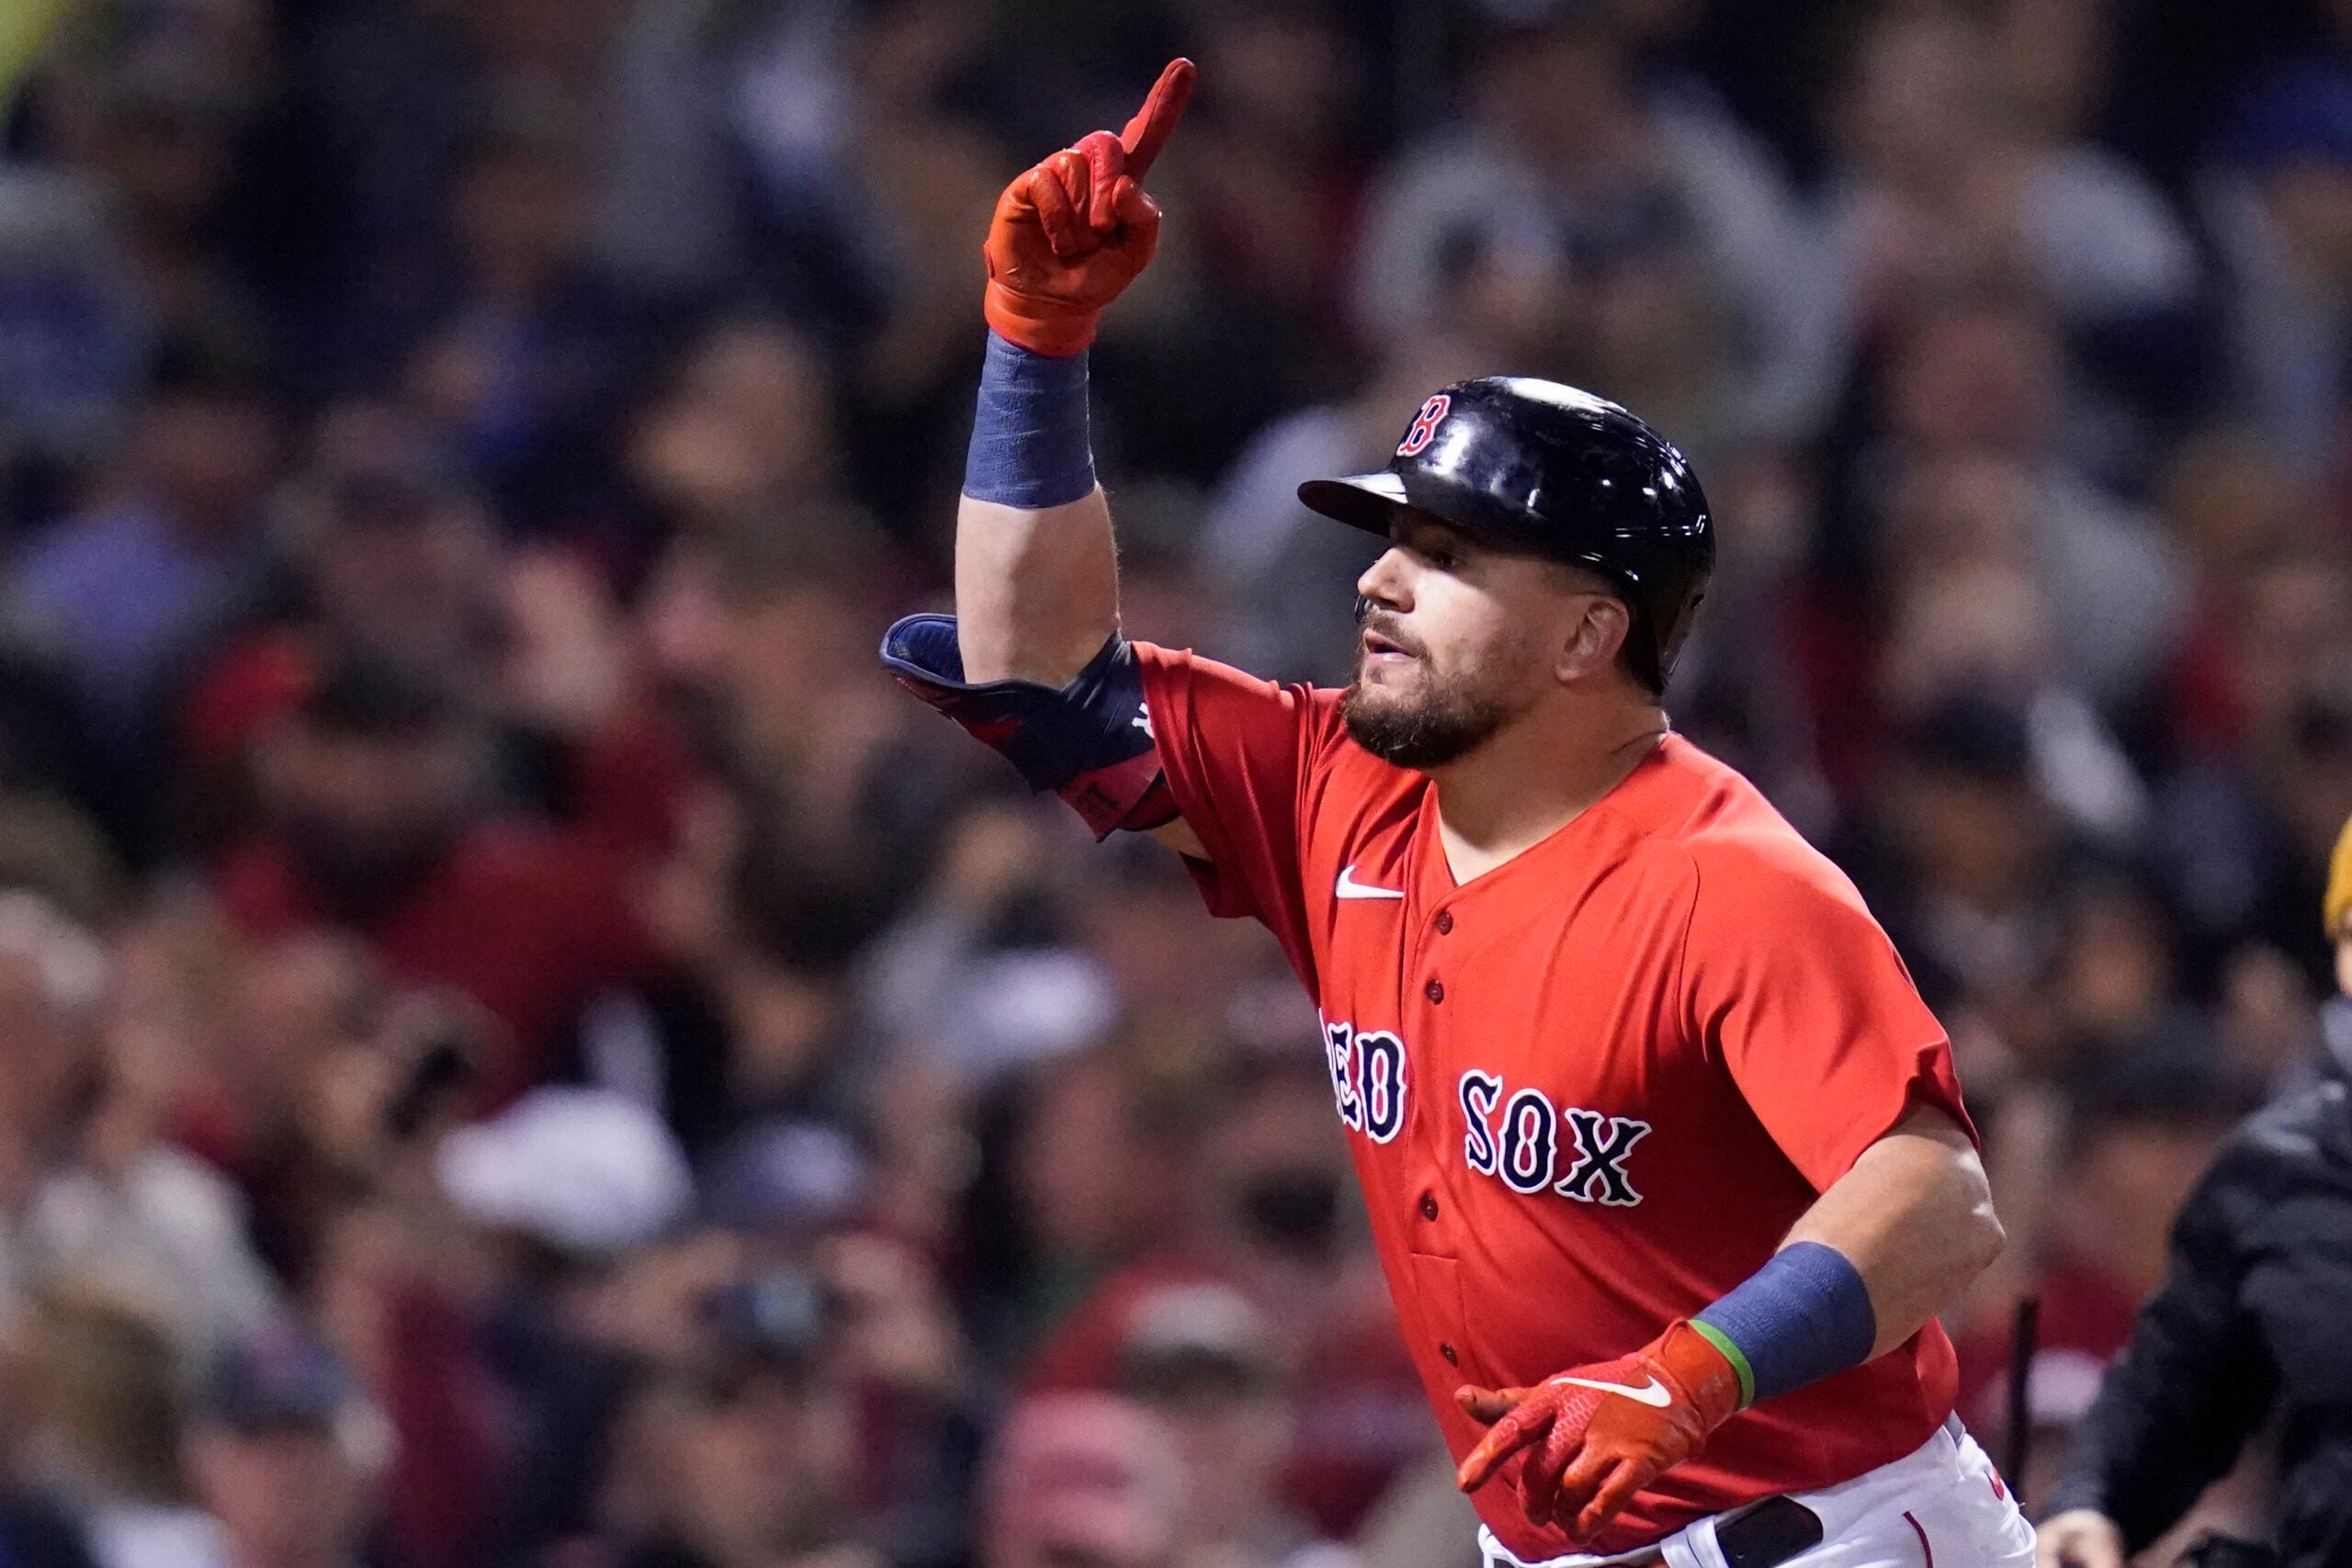 Red Sox beat Yankees in Wild Card Game off Kyle Schwarber and